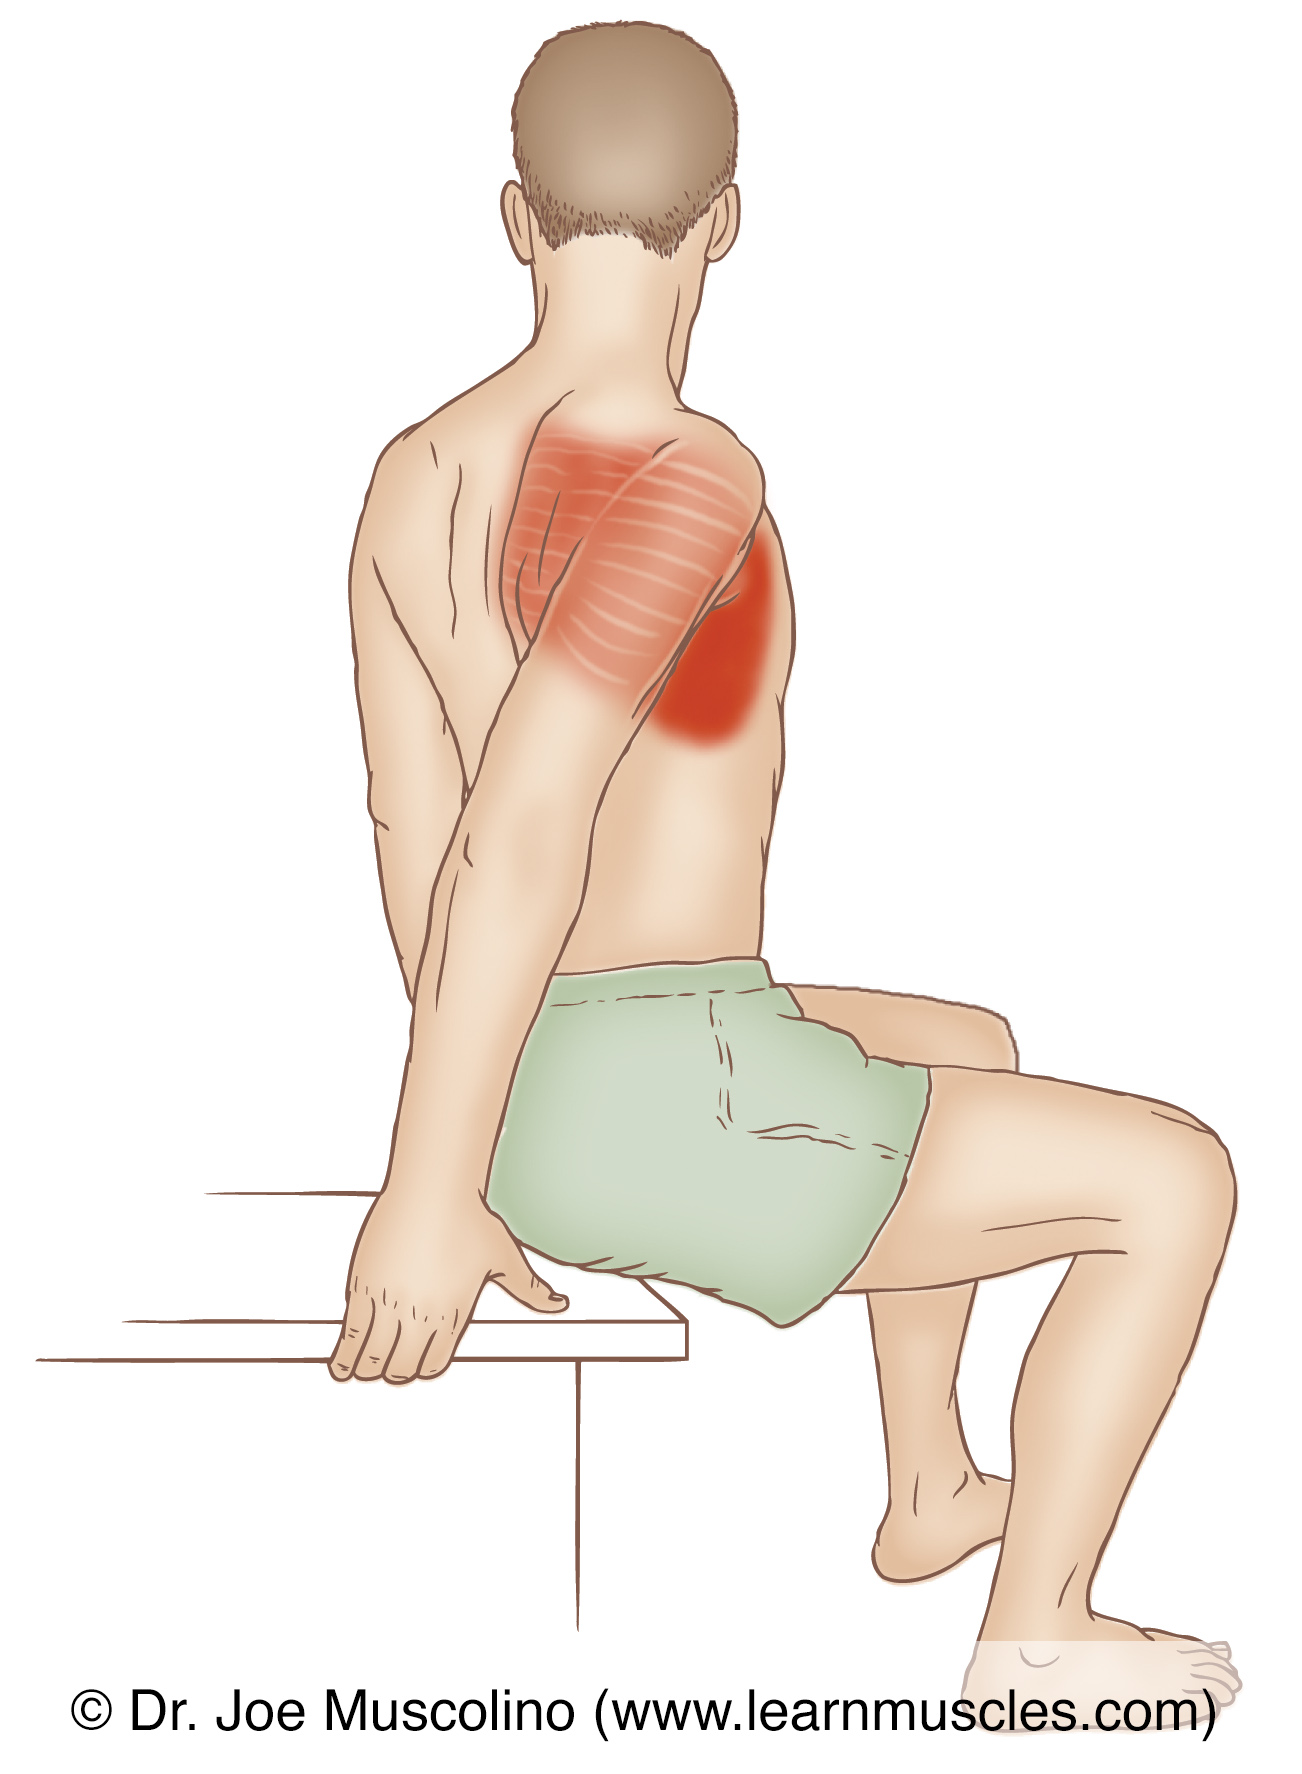 Serratus Anterior - Stretching - Learn Muscles